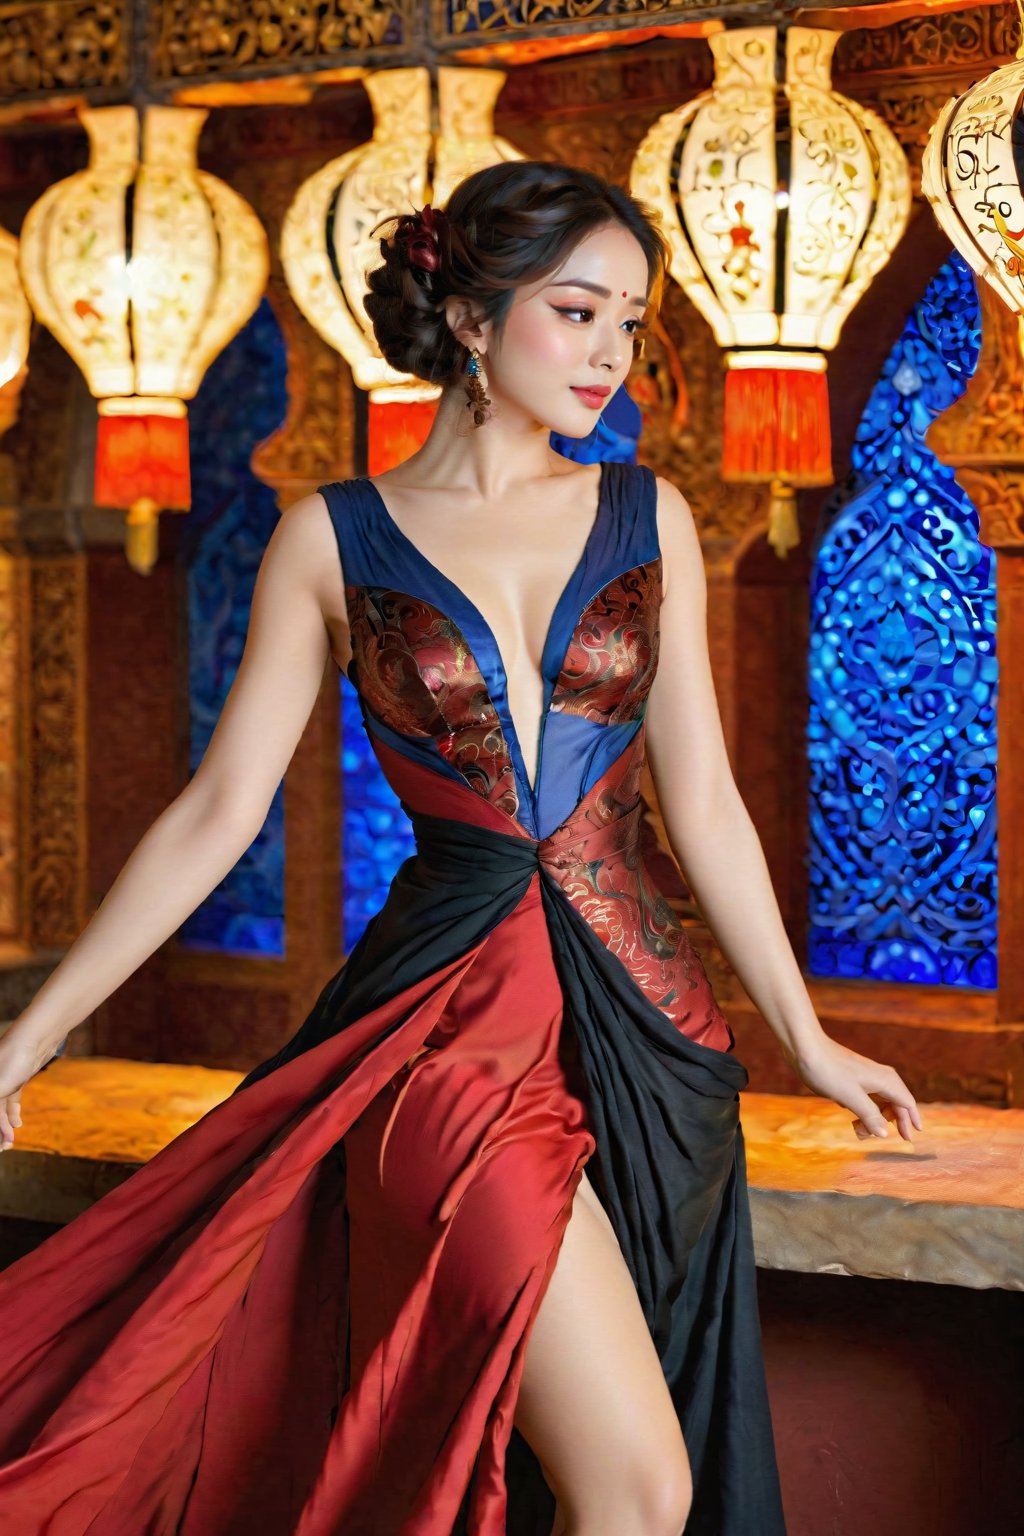 A realistically detailed, beautiful girl wearing a chic red and black party dress gleams beneath the dynamic shimmer of intricate conceptual lamps, crafted from organic Art-Nouveau curves and fluid forms that cascade over her form, stabilizing the scene in an ever-evolving fashion dreamland. With molten ruby-maroon tones igniting her attire and ripe sapphire temps seeping through to else salvage gentle licks at her trim waist, each dignified fold clings to the low gradients of a light-catching fabric that swirls lusciously into the arms of spectral background features, reflecting numerous indices of shifting, abstract dimensions consecrated through mirror-plane spaces conceptualized by Scheherazade's philosophy of transcient elegance and Scheherazade's creative labor of illuminated literati manuscript signs. Narratives of transcient}. Let me know if you need further clarifications :)

A realistically detailed, beautiful girl wearing a chic red and black party dress is surrounded by intricate, shimmering Art-Nouveau lamps that cast dynamic, fluid shadows upon her form, as luscious ruby-maroon and sapphire blue hues swirl around her figure and take root in the cinematic conceptual spaces around her. Each subtle curve of her elegant body is crisply yet organically rendered, a harmonious contrast to the multidimensional, transcient surroundings that artfully embrace her essence as a beacon of fashionable allure, forever transforming with the alternating flows of dazzling, abstract dreamscapes conceptualized by the timeless imagination of Scheherazade's Scheherazadean labor of illuminated manuscripts.